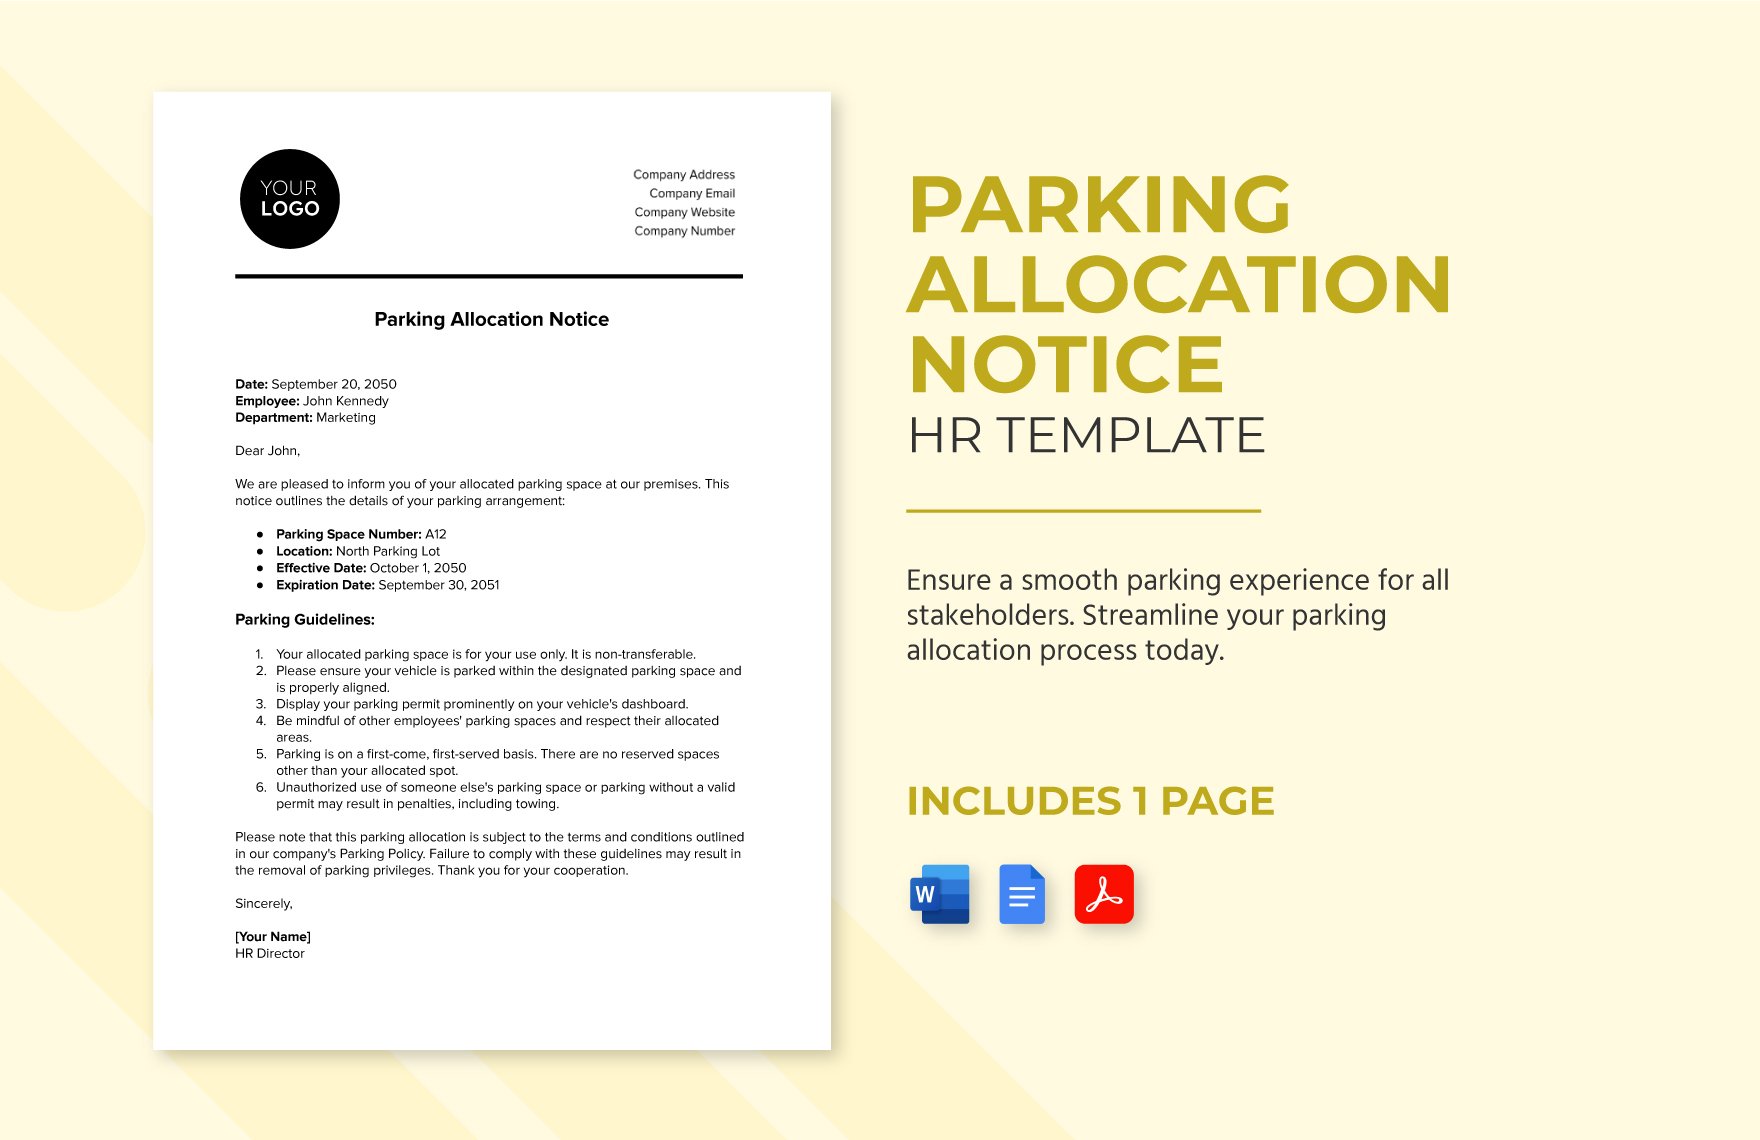 Parking Allocation Notice HR Template in Word, Google Docs, PDF